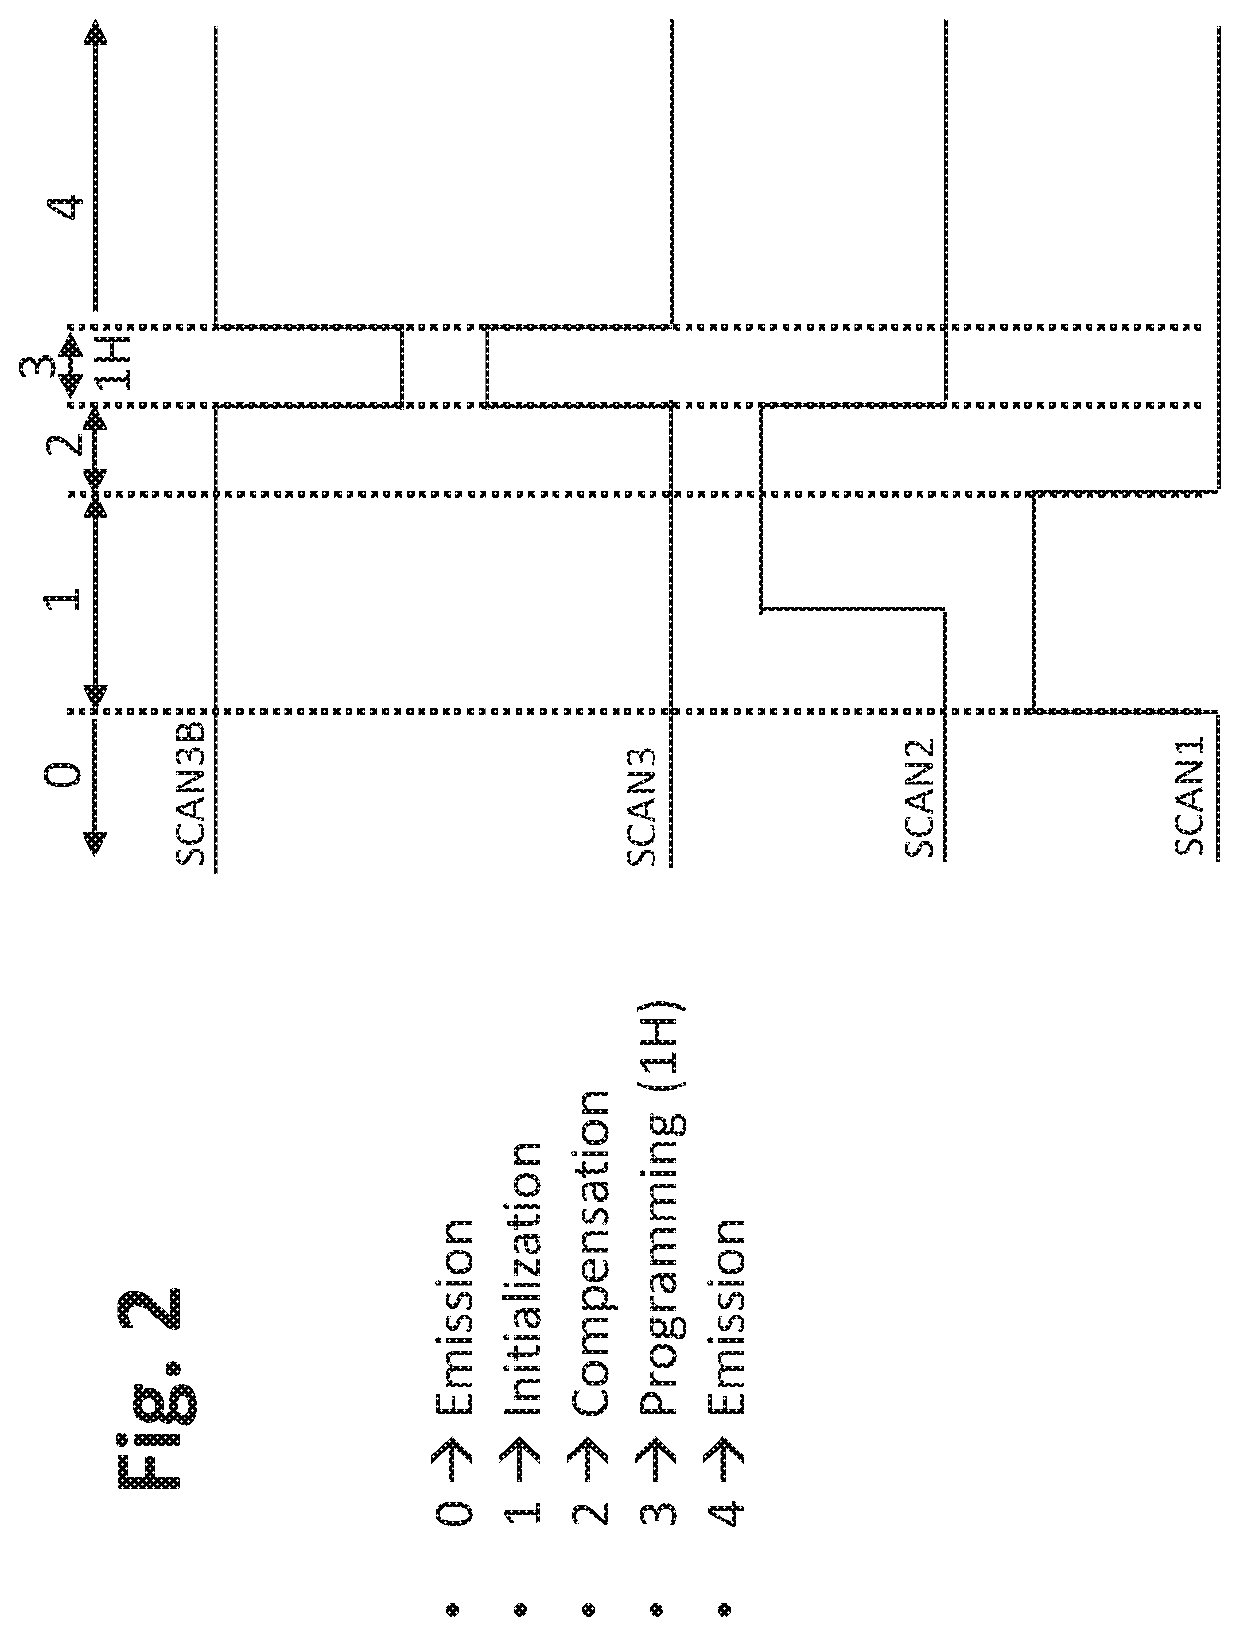 TFT pixel threshold voltage compensation circuit using a variable capacitor